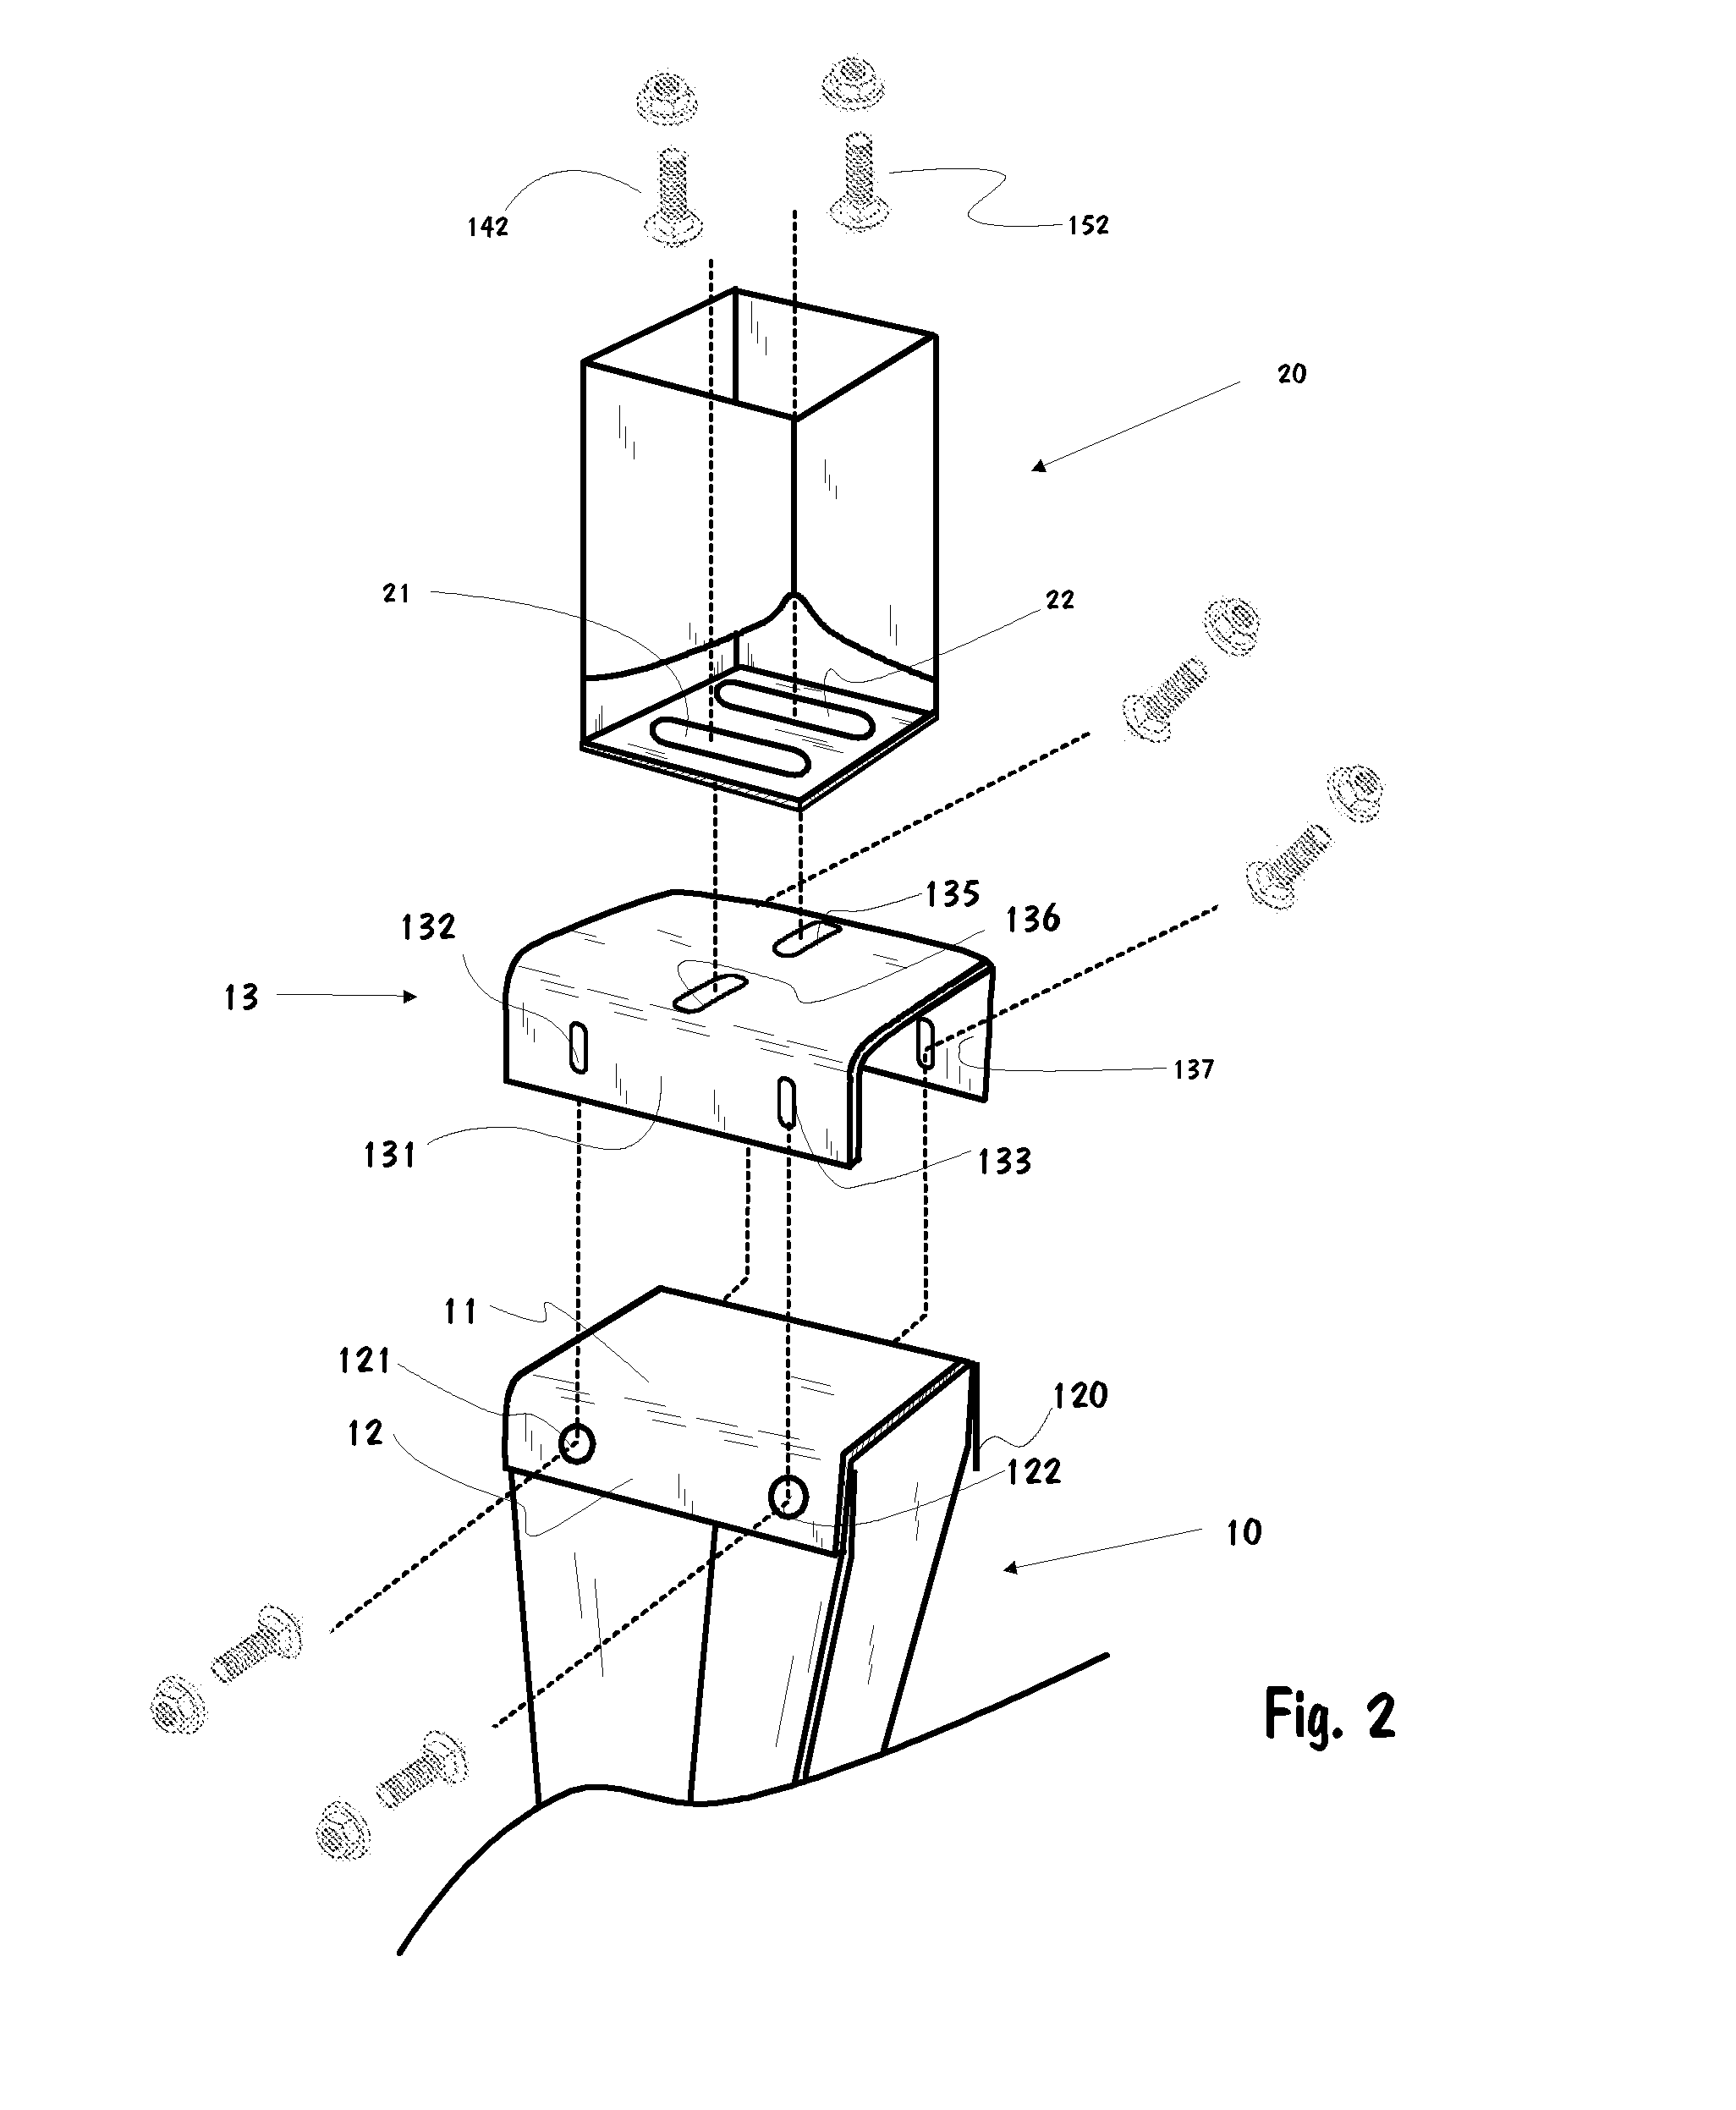 Ground anchor with tilt compensation